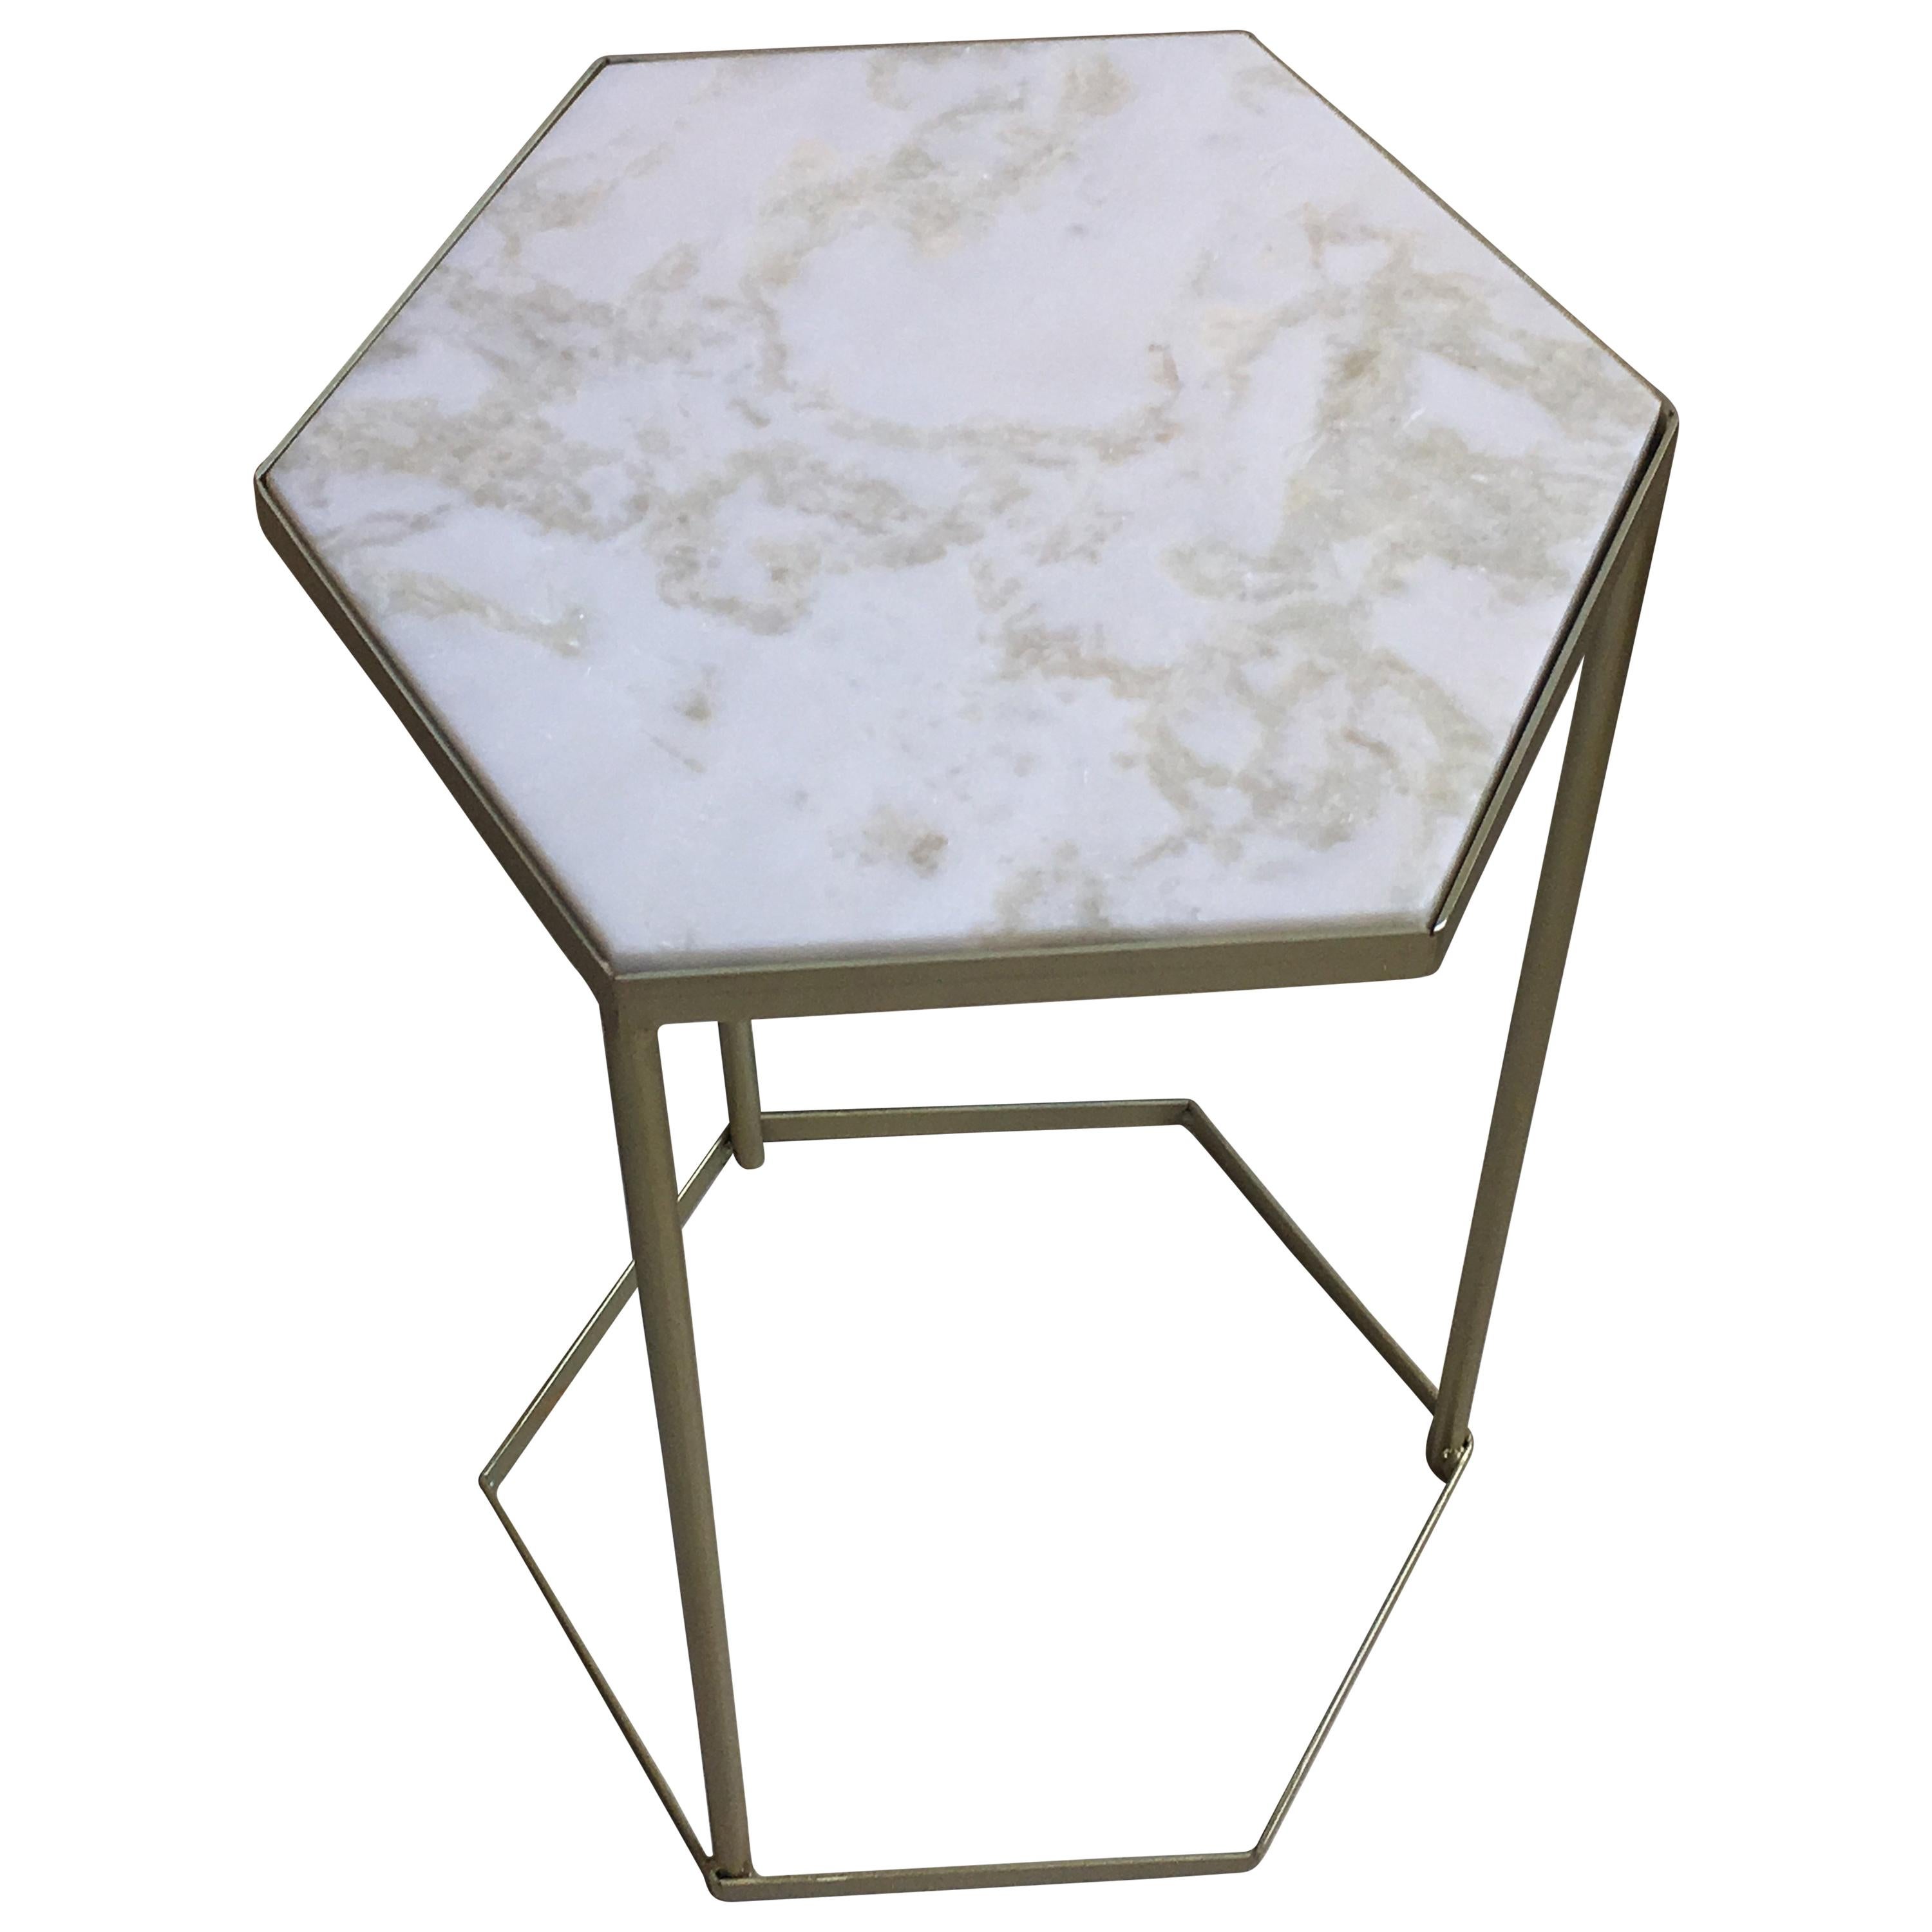 New Marble-Top and Gilt Painted Iron Hexagonal Side Table or End Table